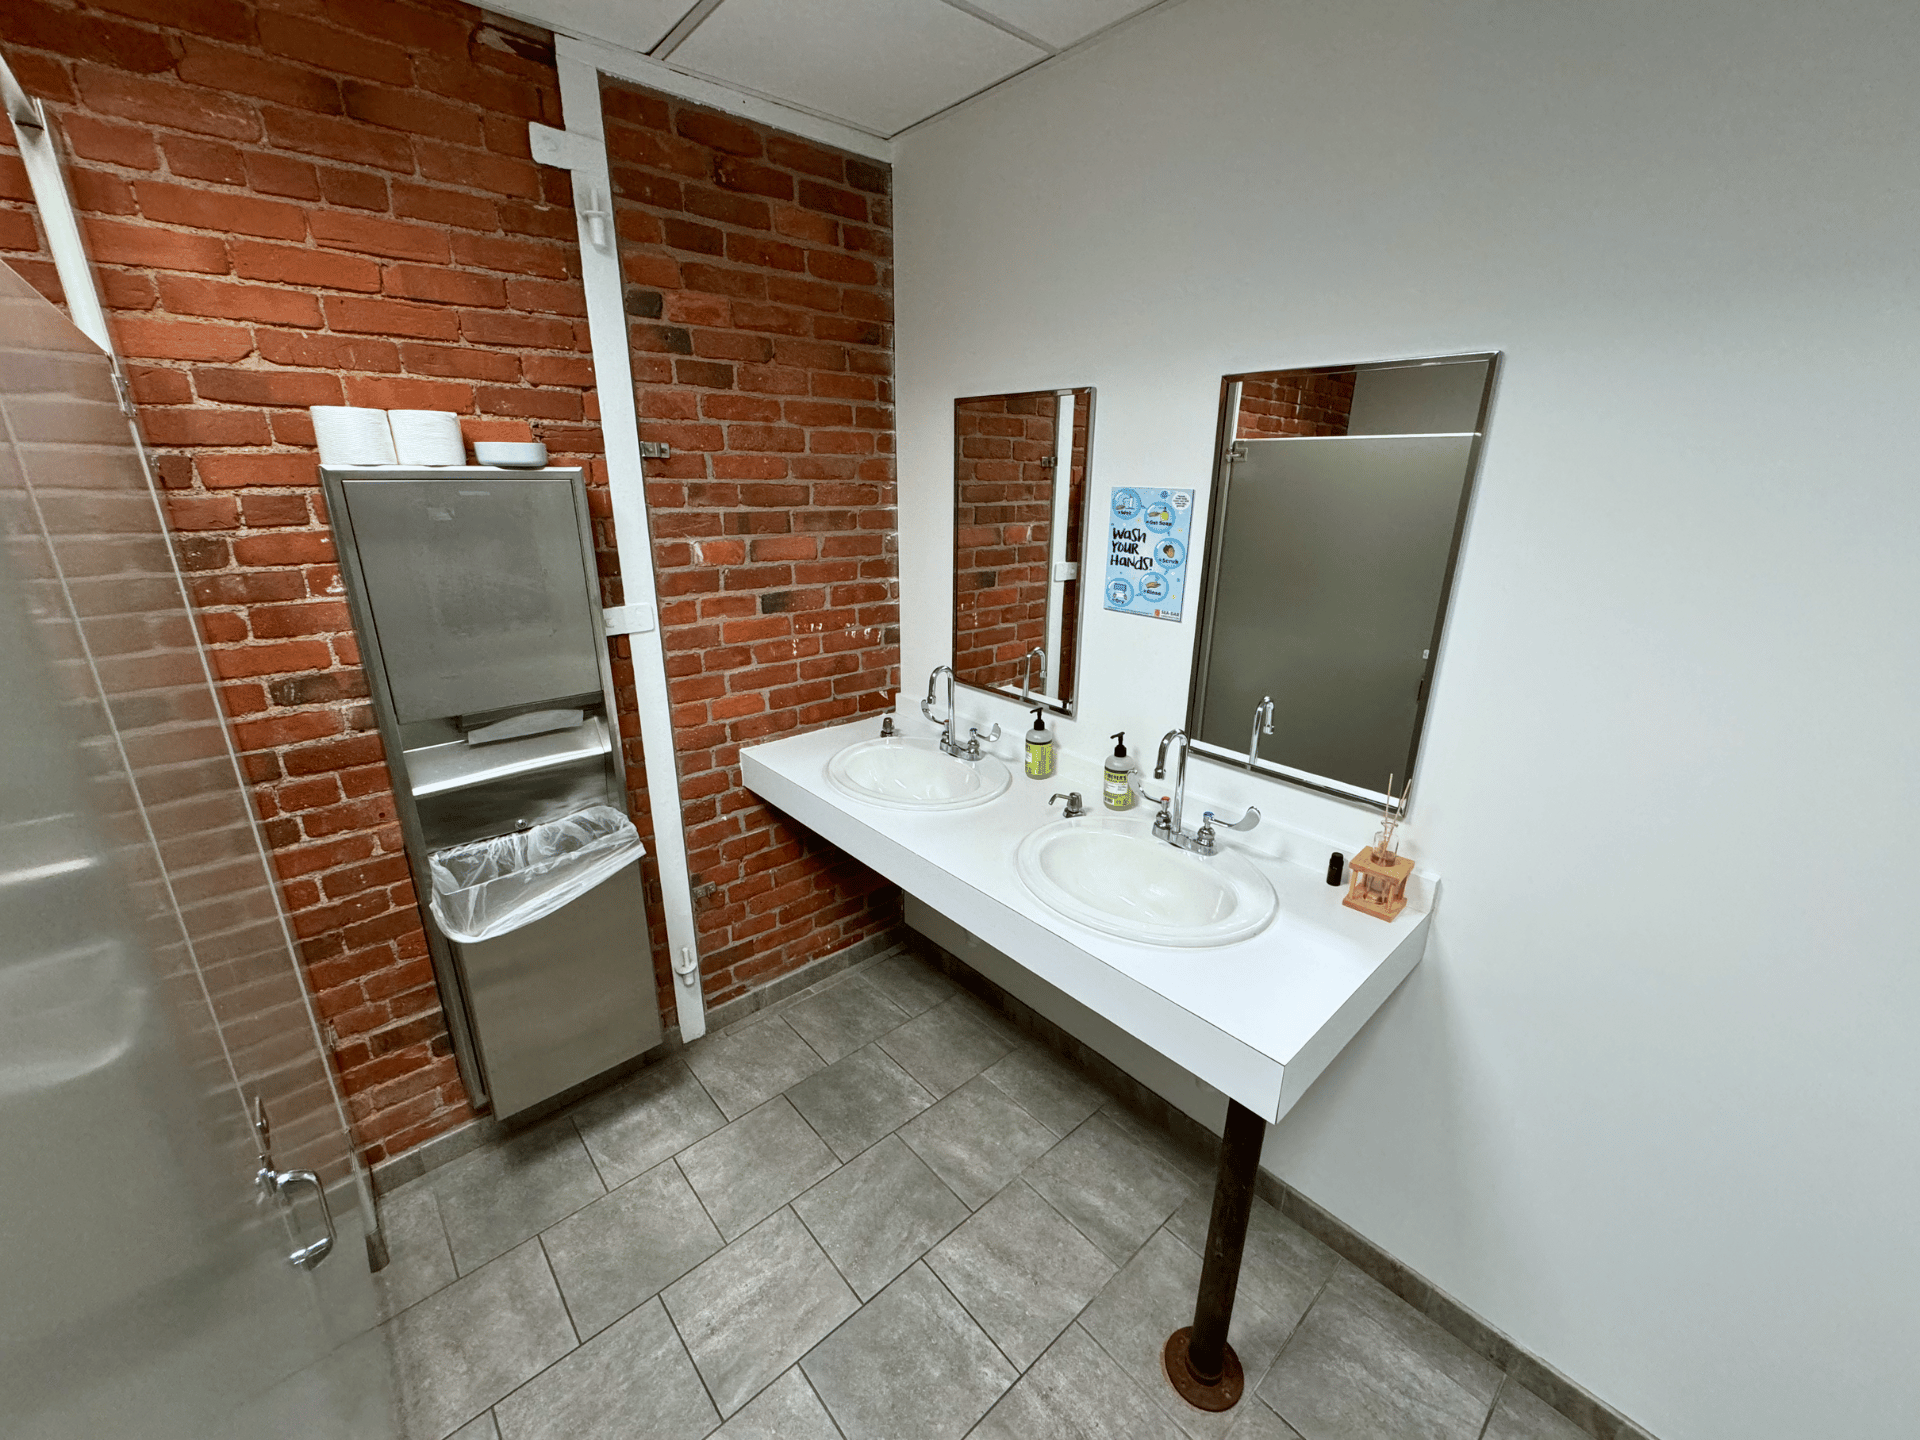 A bathroom with two sinks and two mirrors and a brick wall in a commercial office in Boston MA. This office bathroom is cleaned by ThinkFast Cleaning Services.